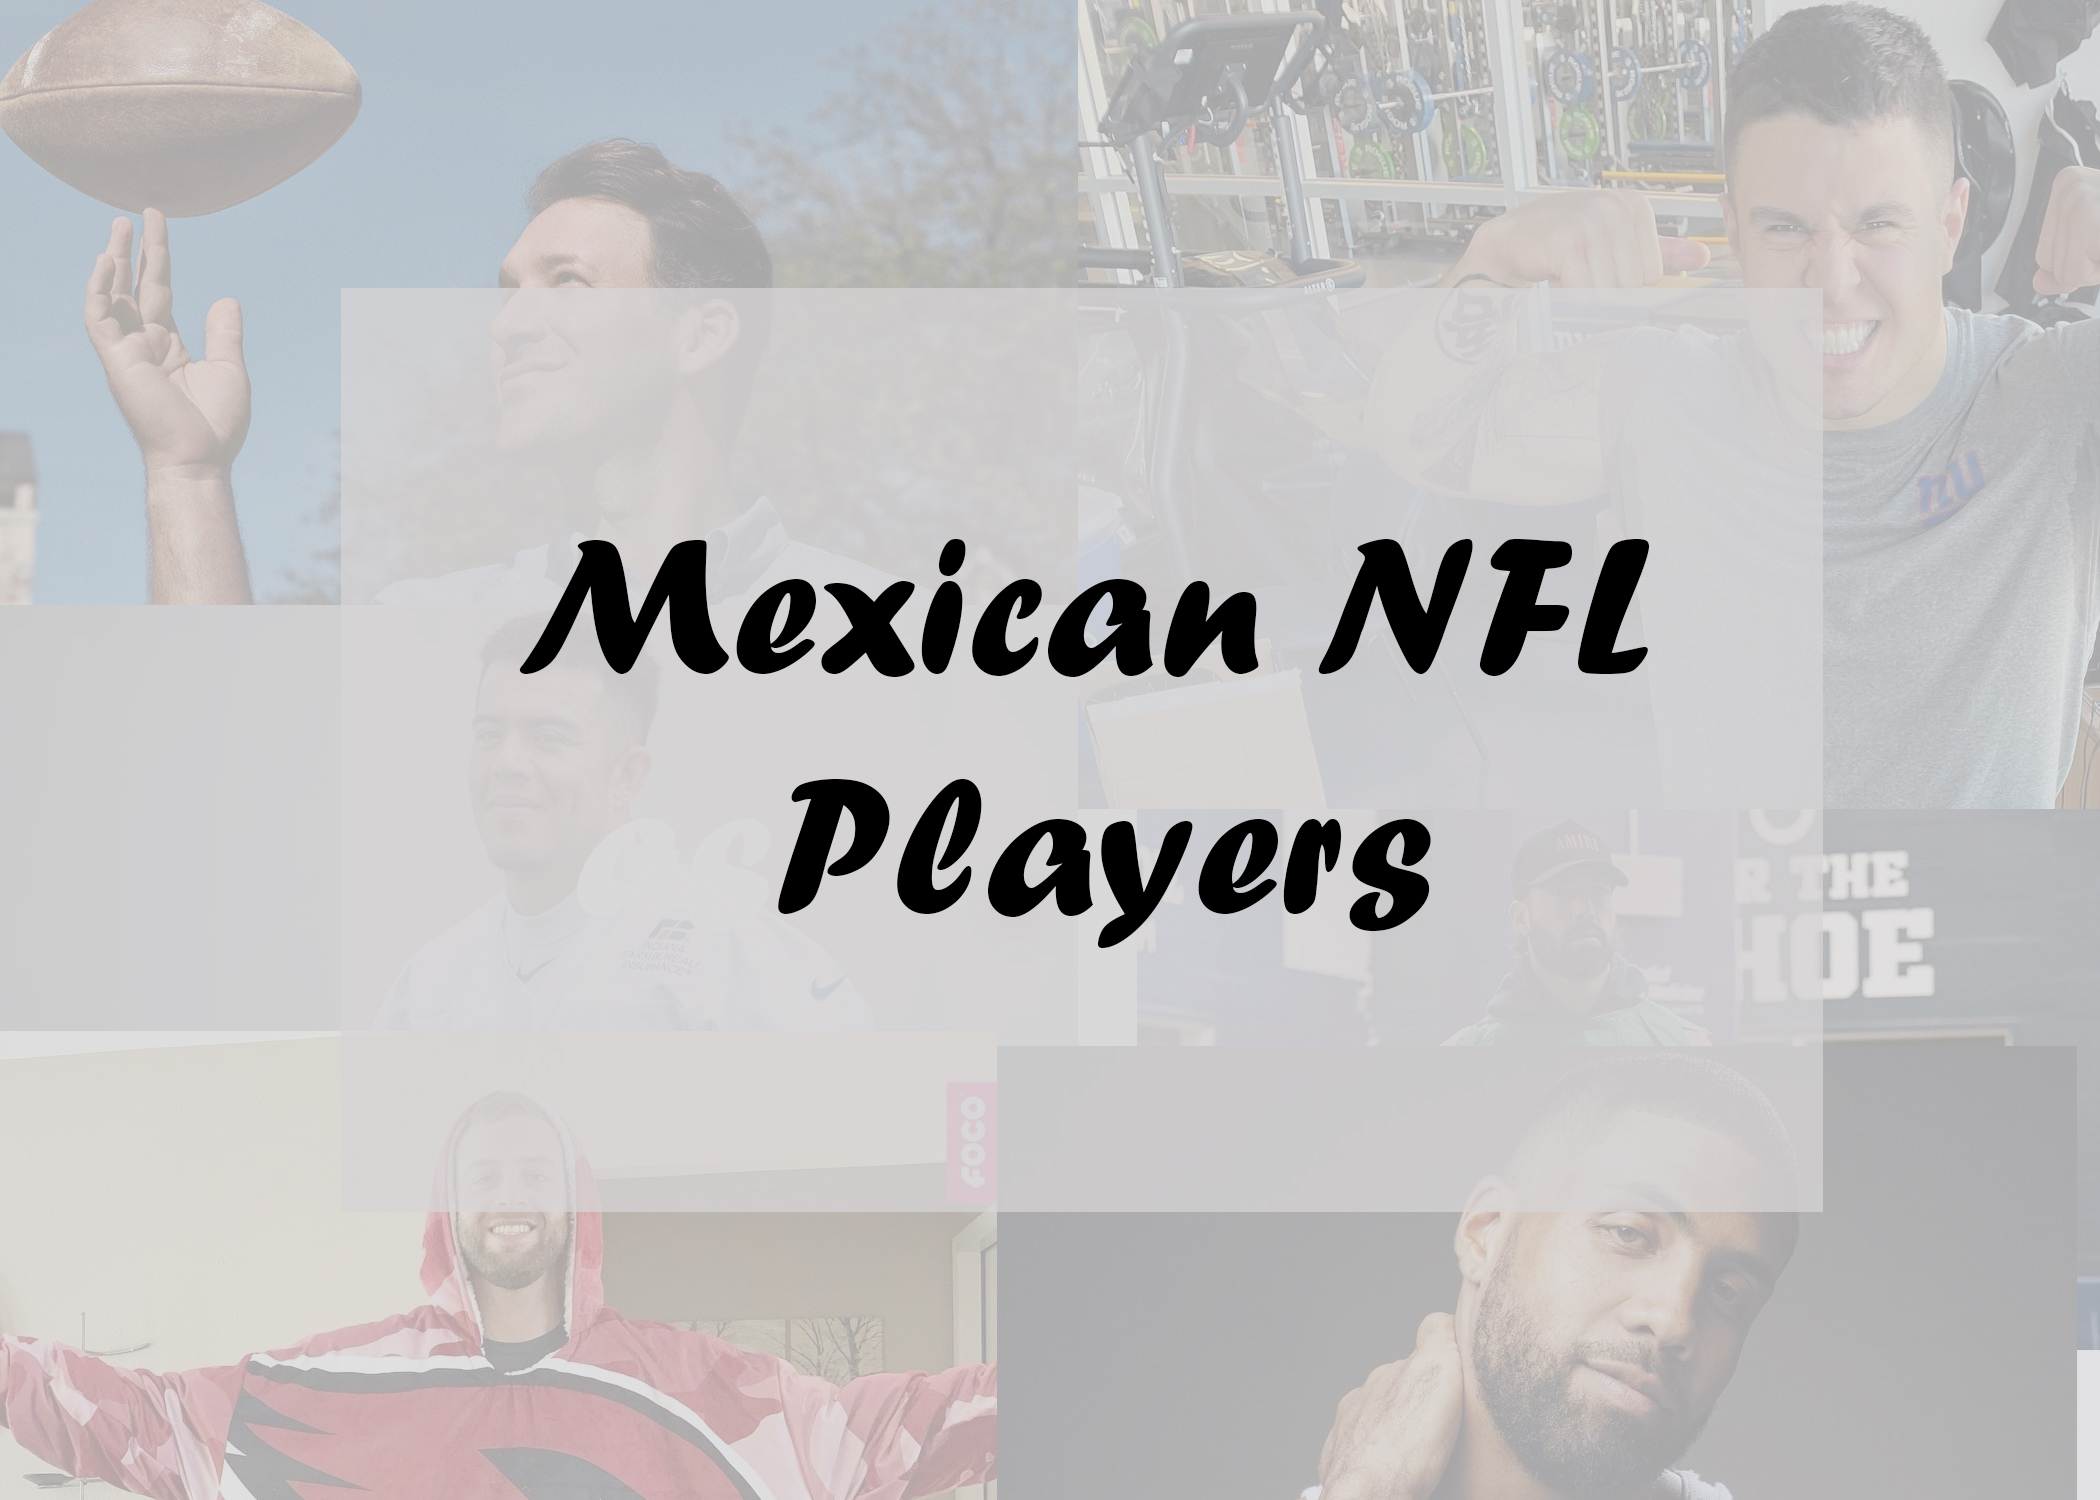 Mexican NFL Players